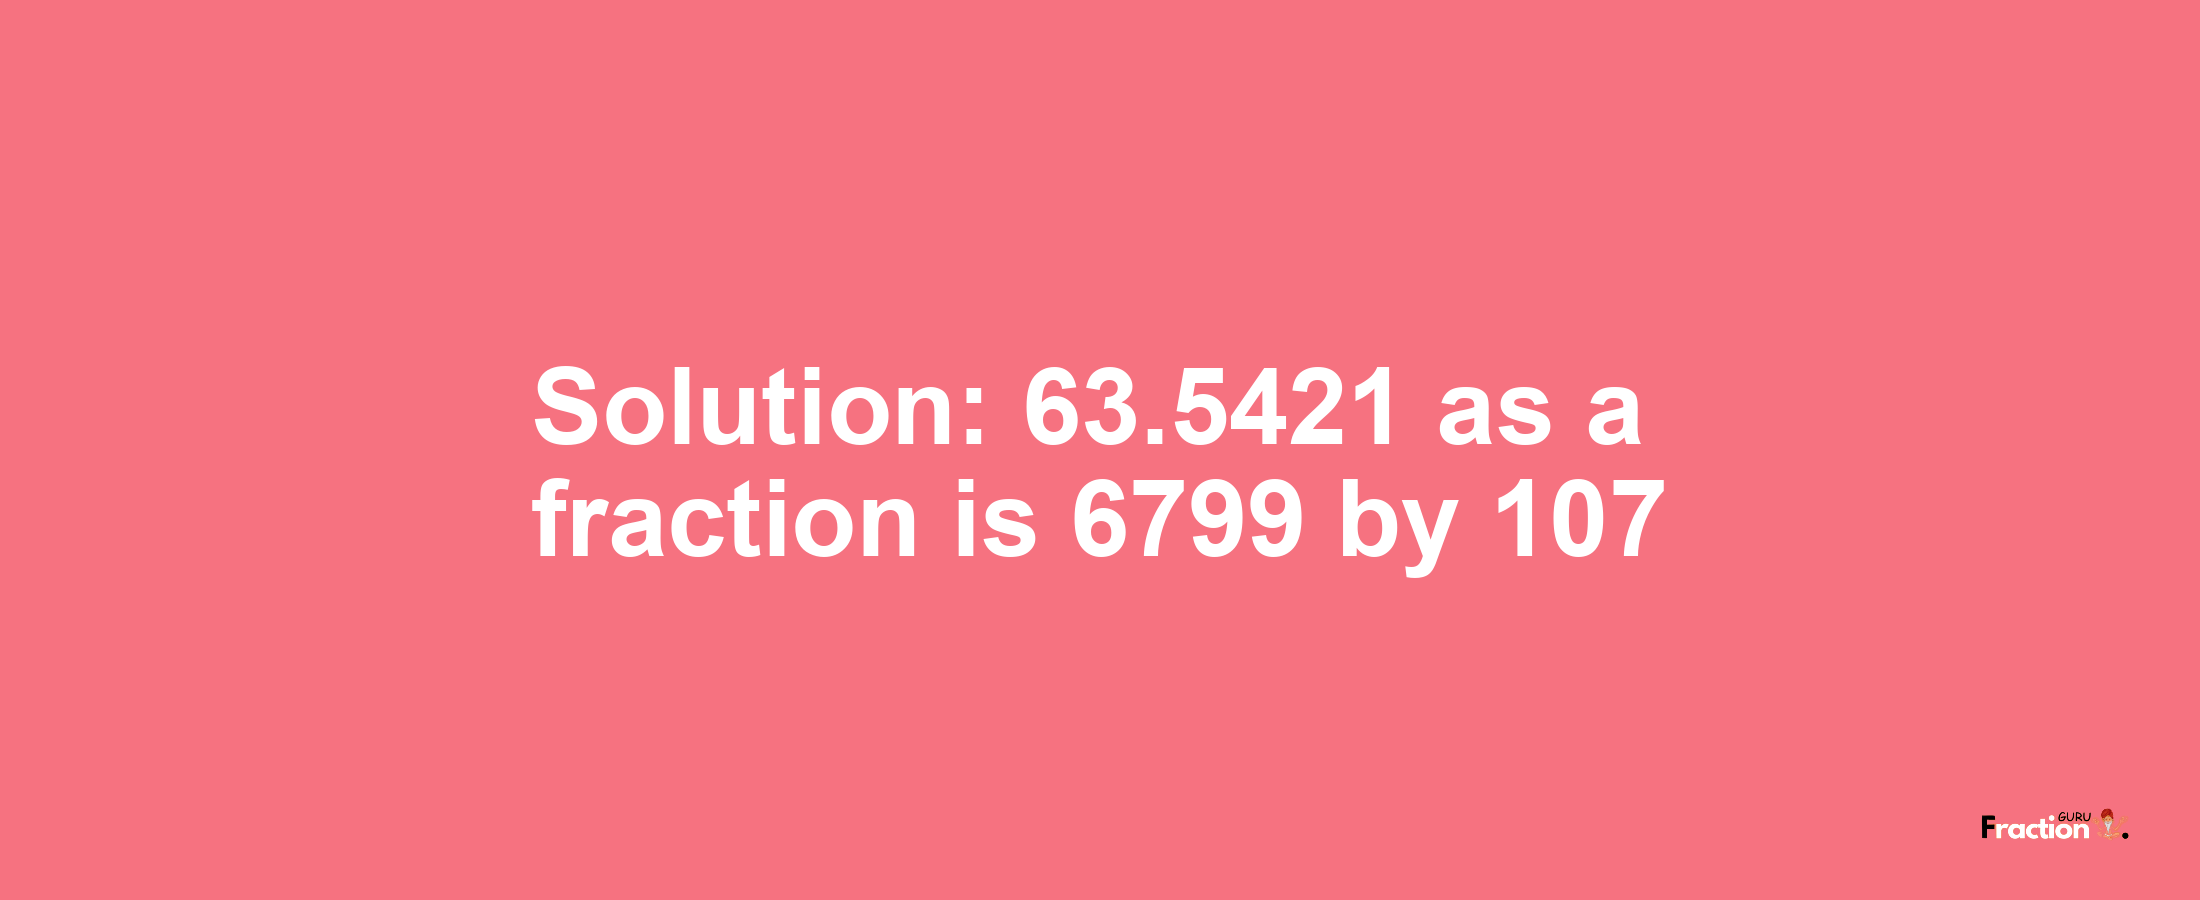 Solution:63.5421 as a fraction is 6799/107